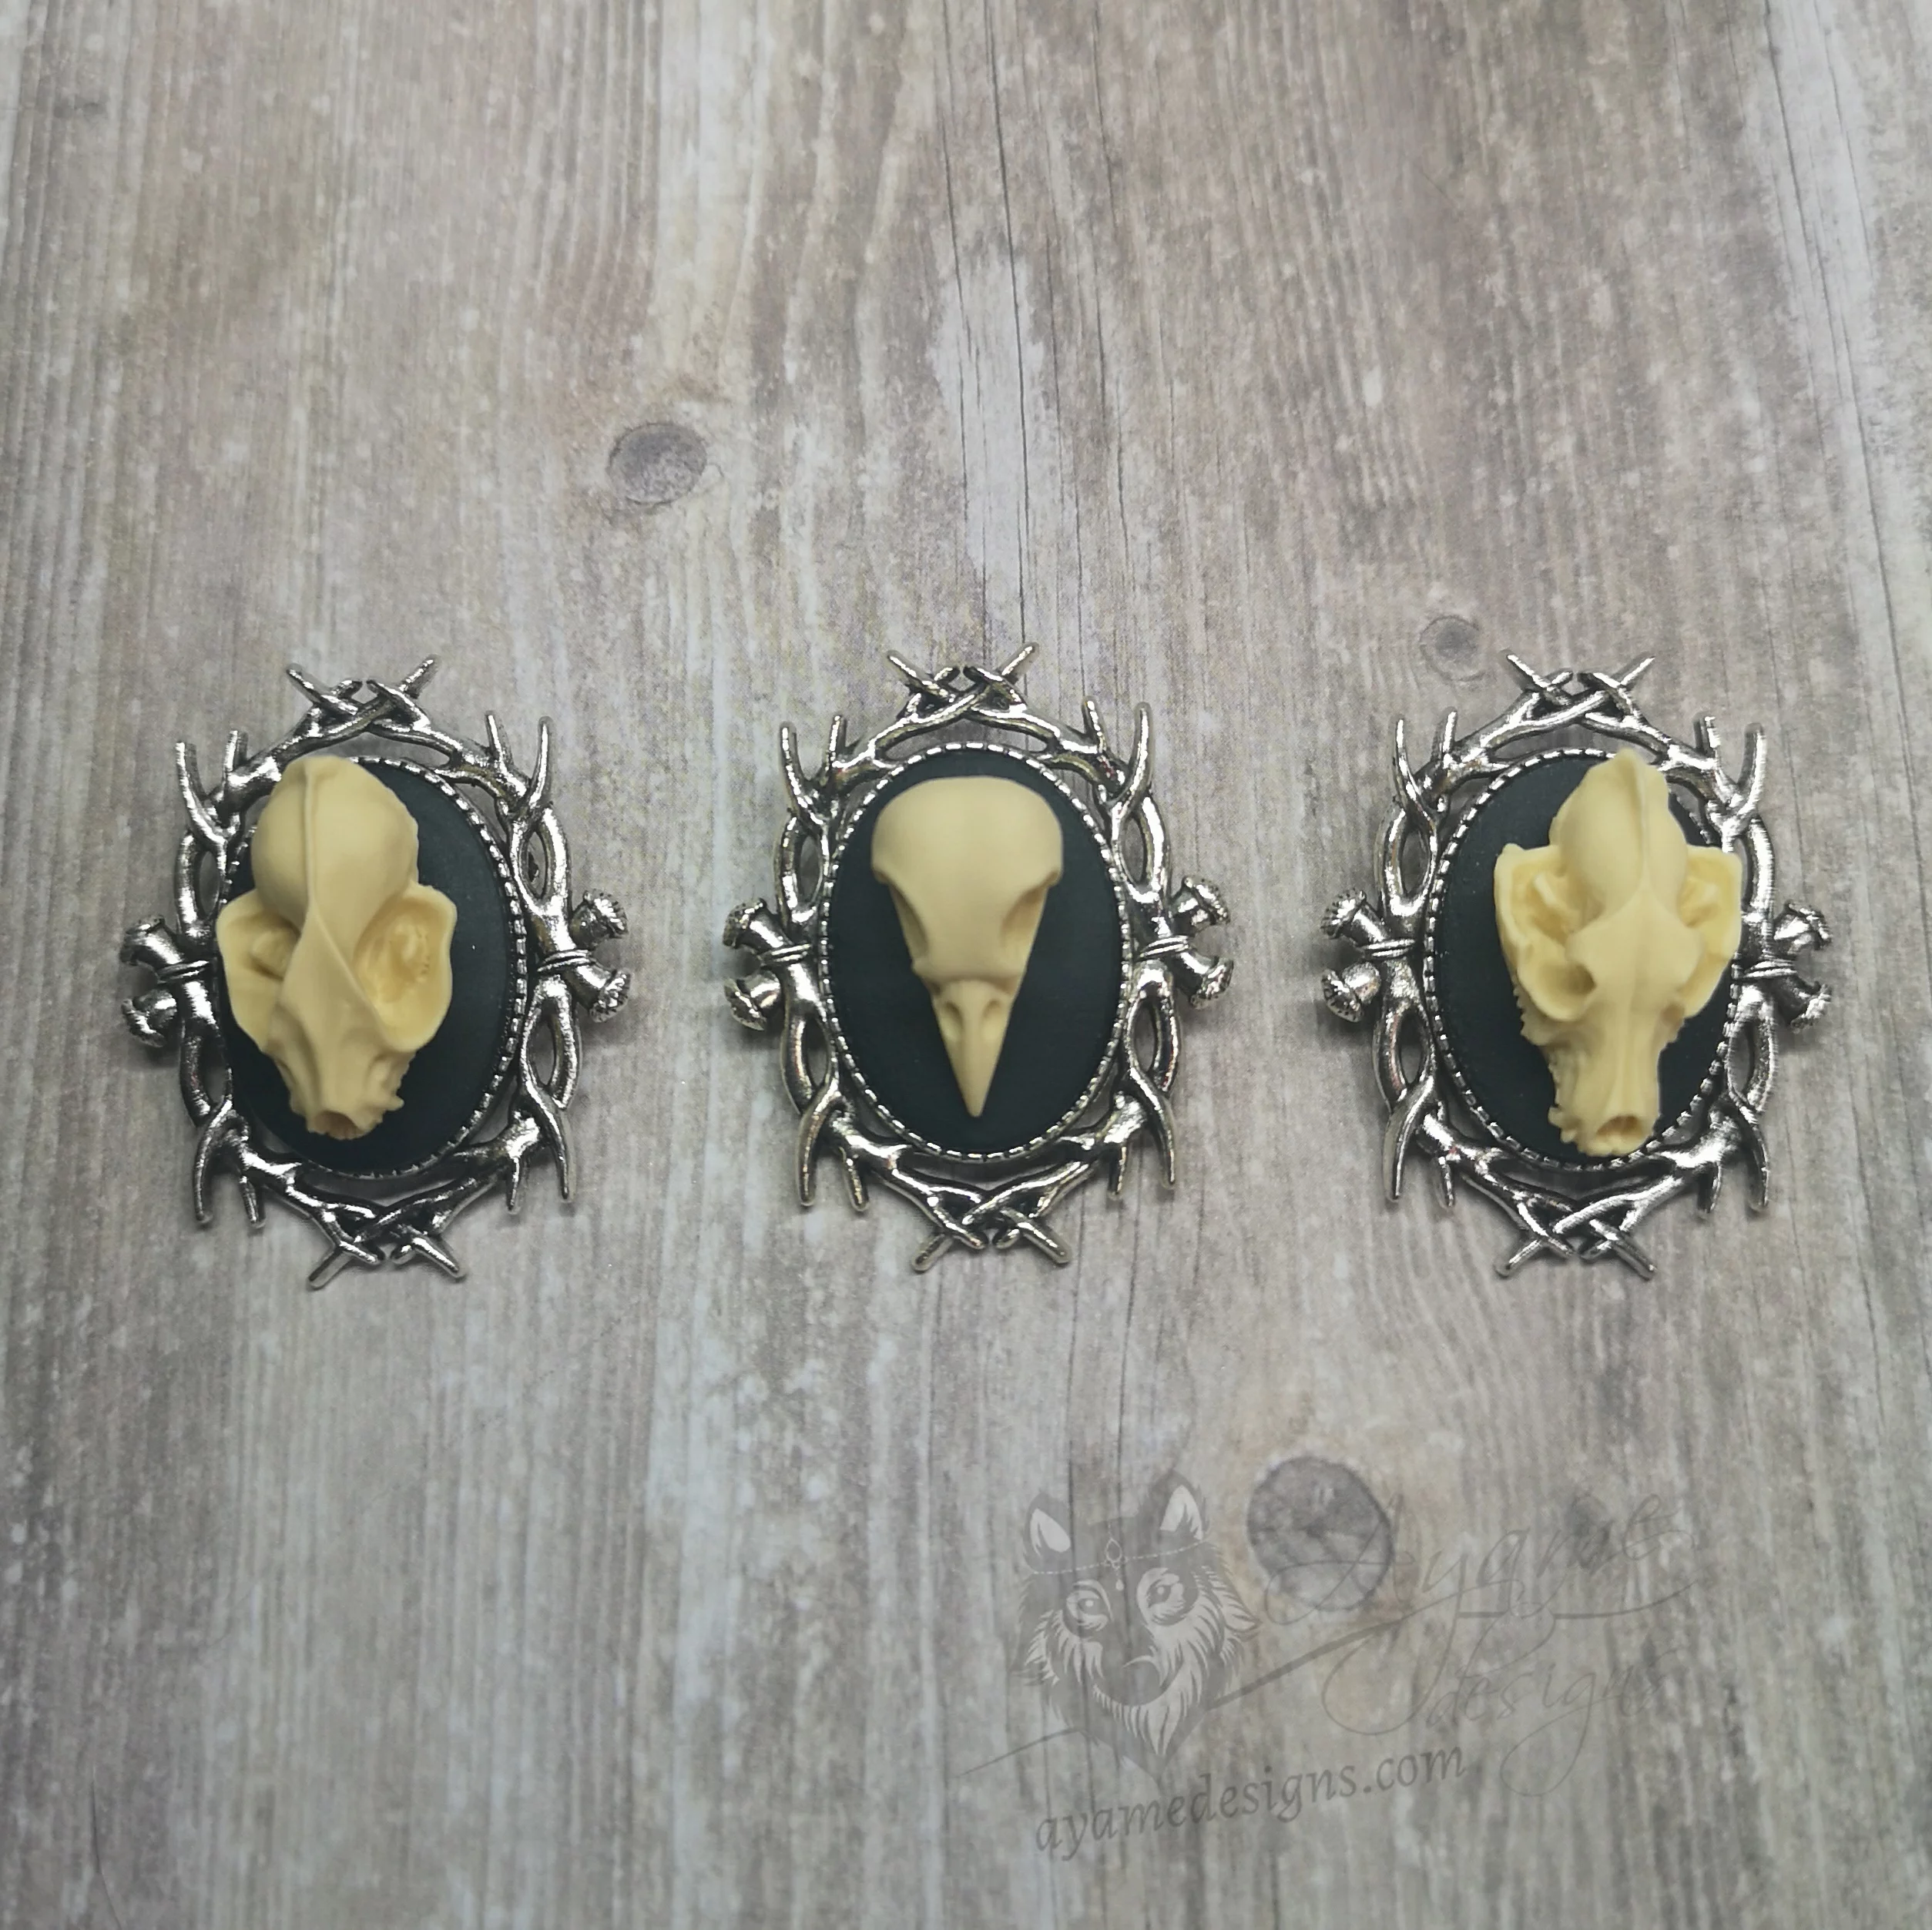 Small resin animal skull cameo brooch with a branch style frame